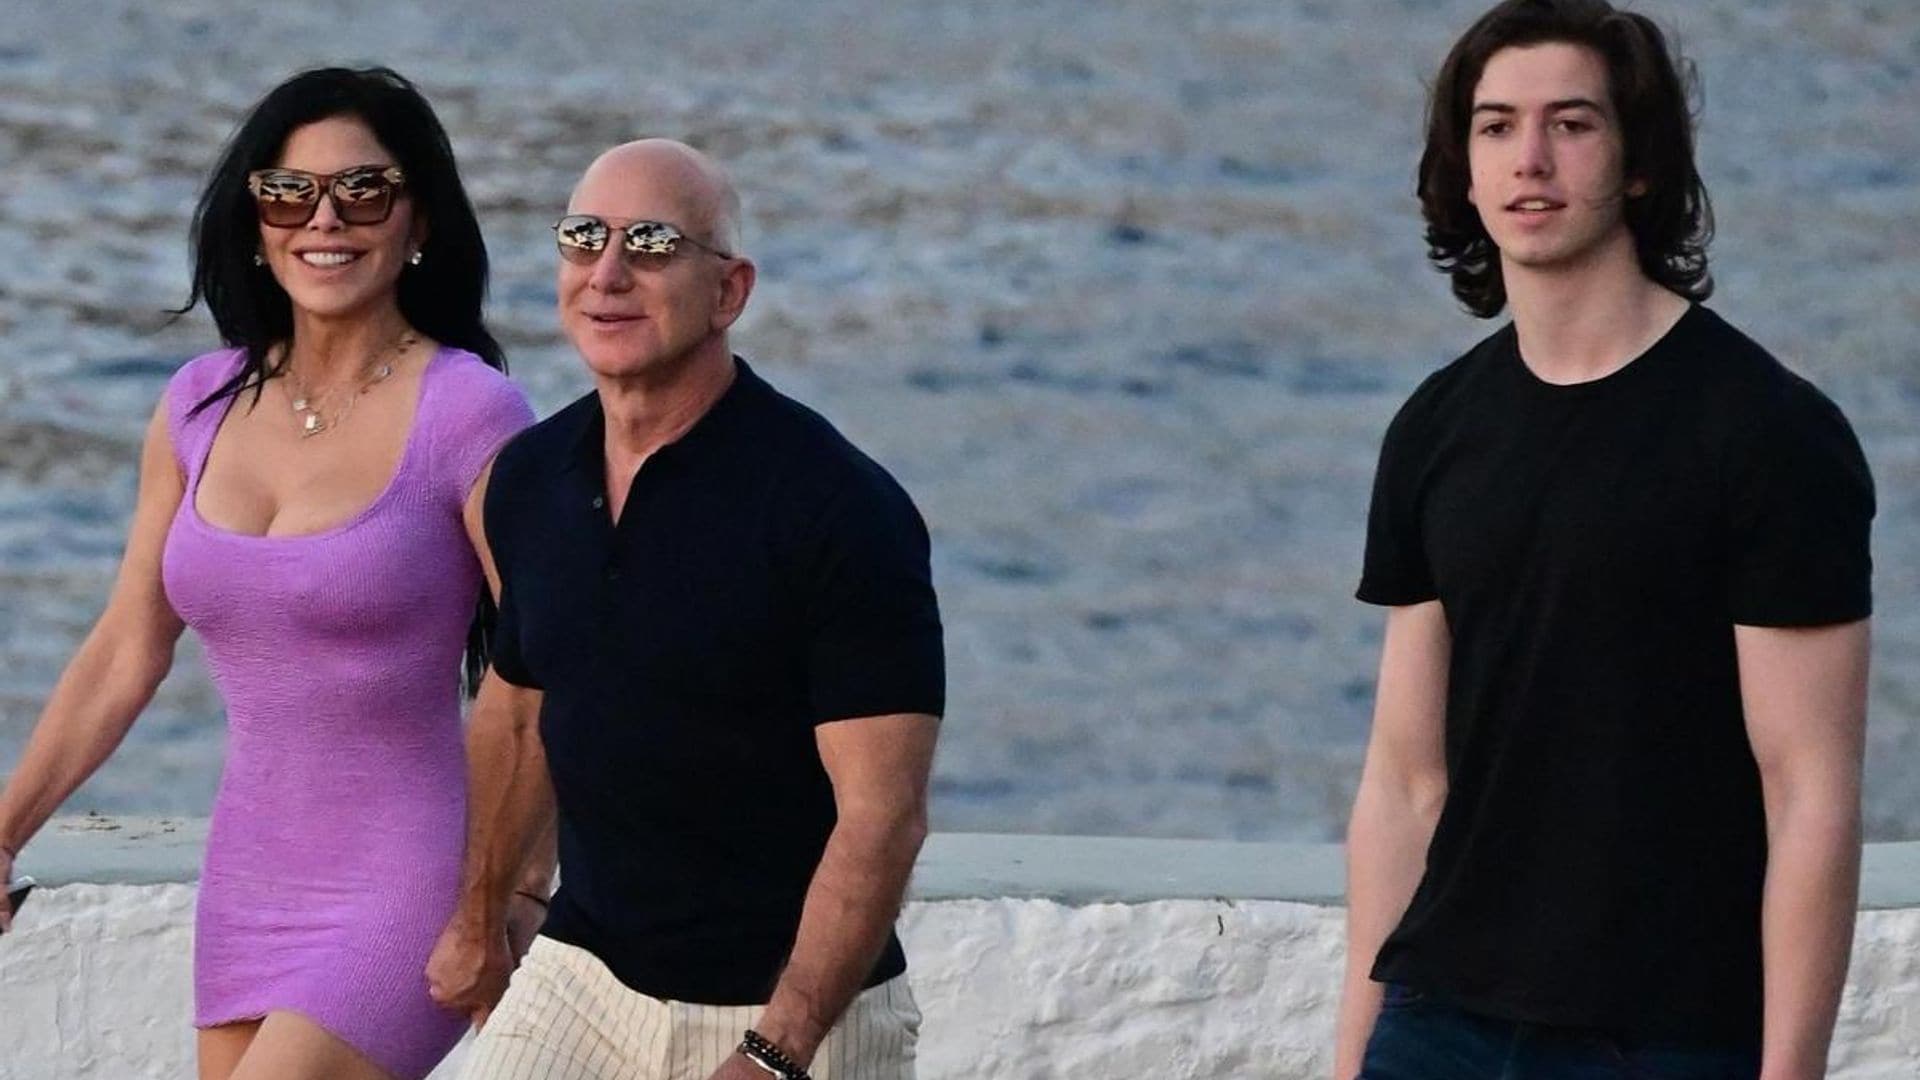 Lauren Sanchez and Jeff Bezos vacation in Greece with his son